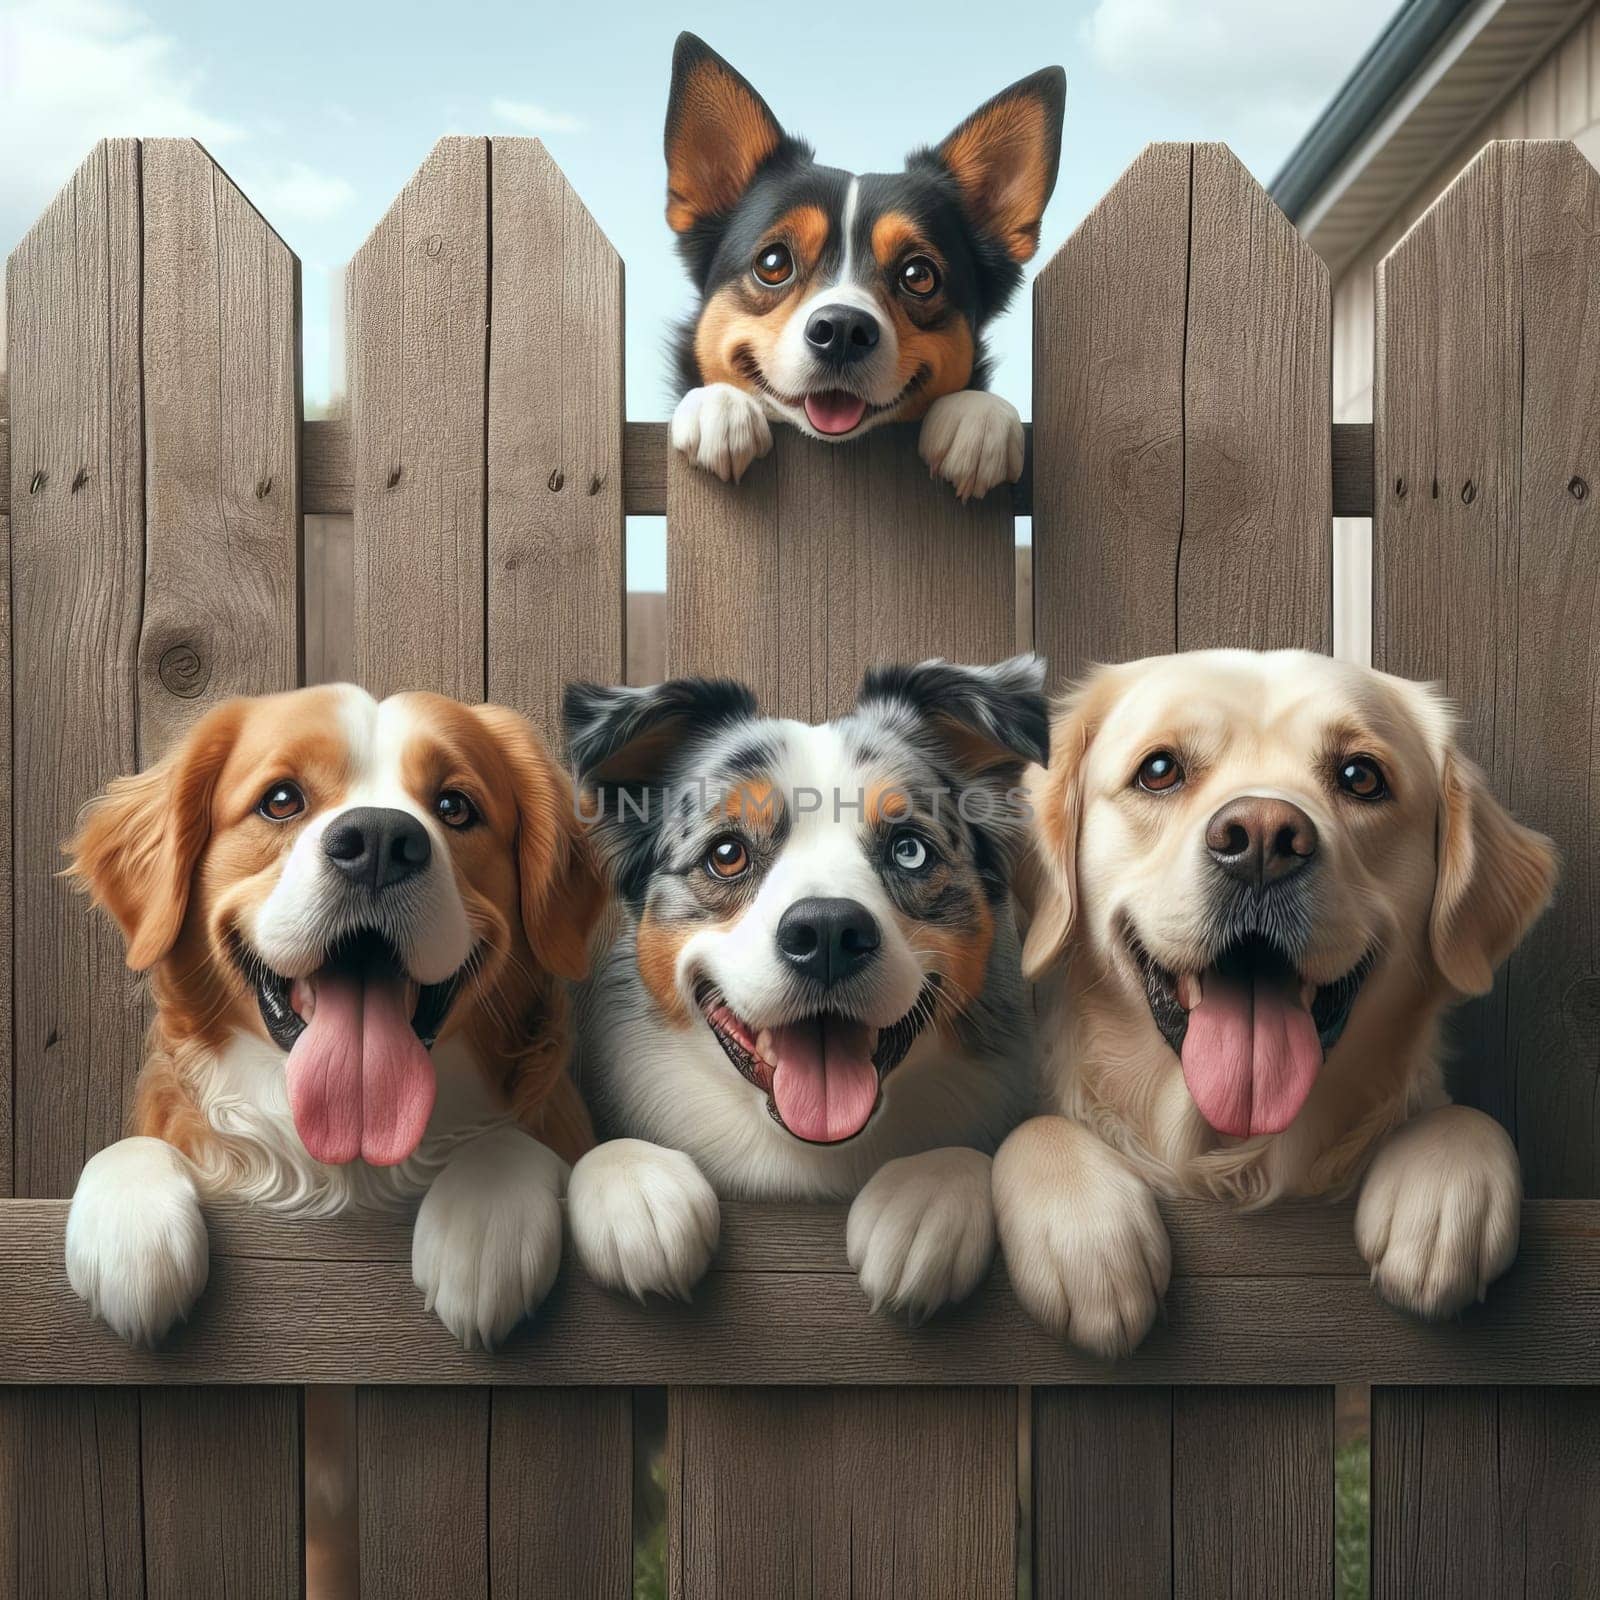 Four happy dogs of different breeds peeking over a wooden fence, showcasing their playful and friendly nature